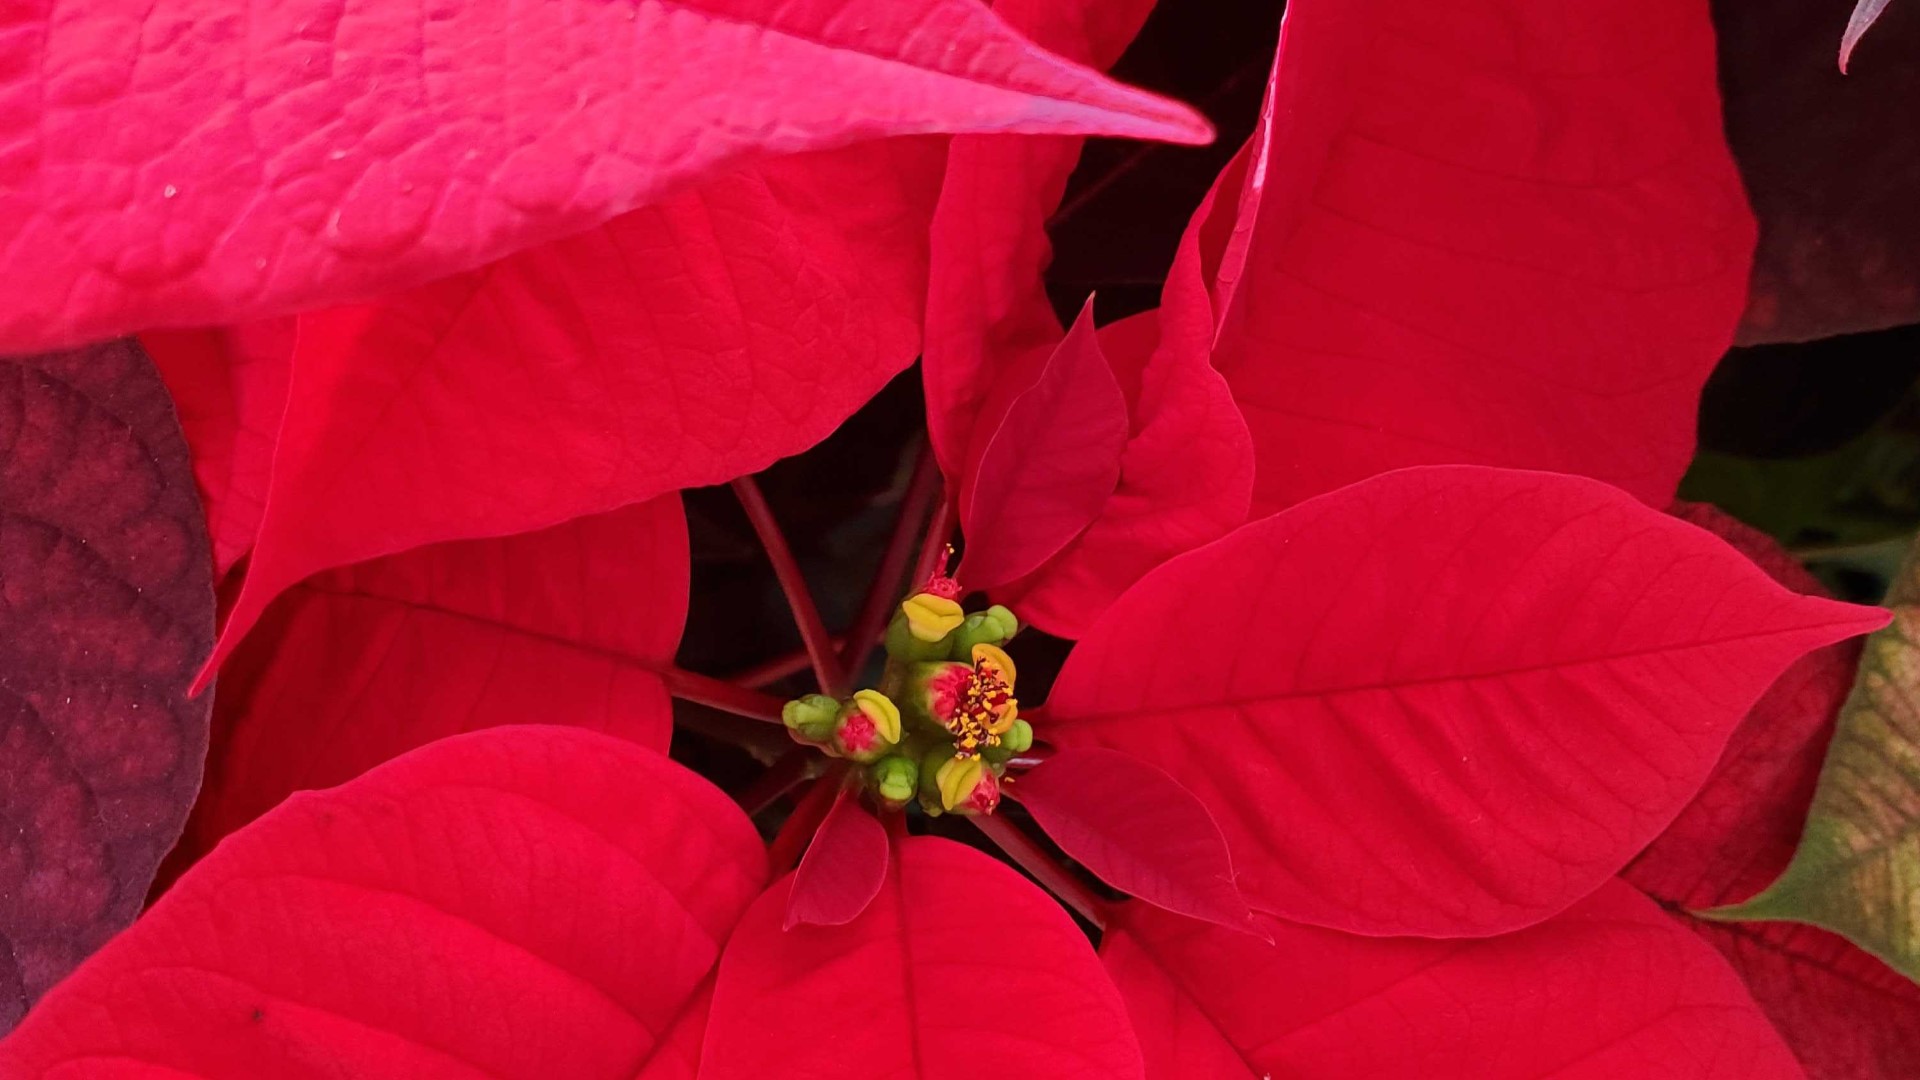 Jenny Amstutz with Nature's Corner explains how to keep your poinsettias thriving through the holiday season.